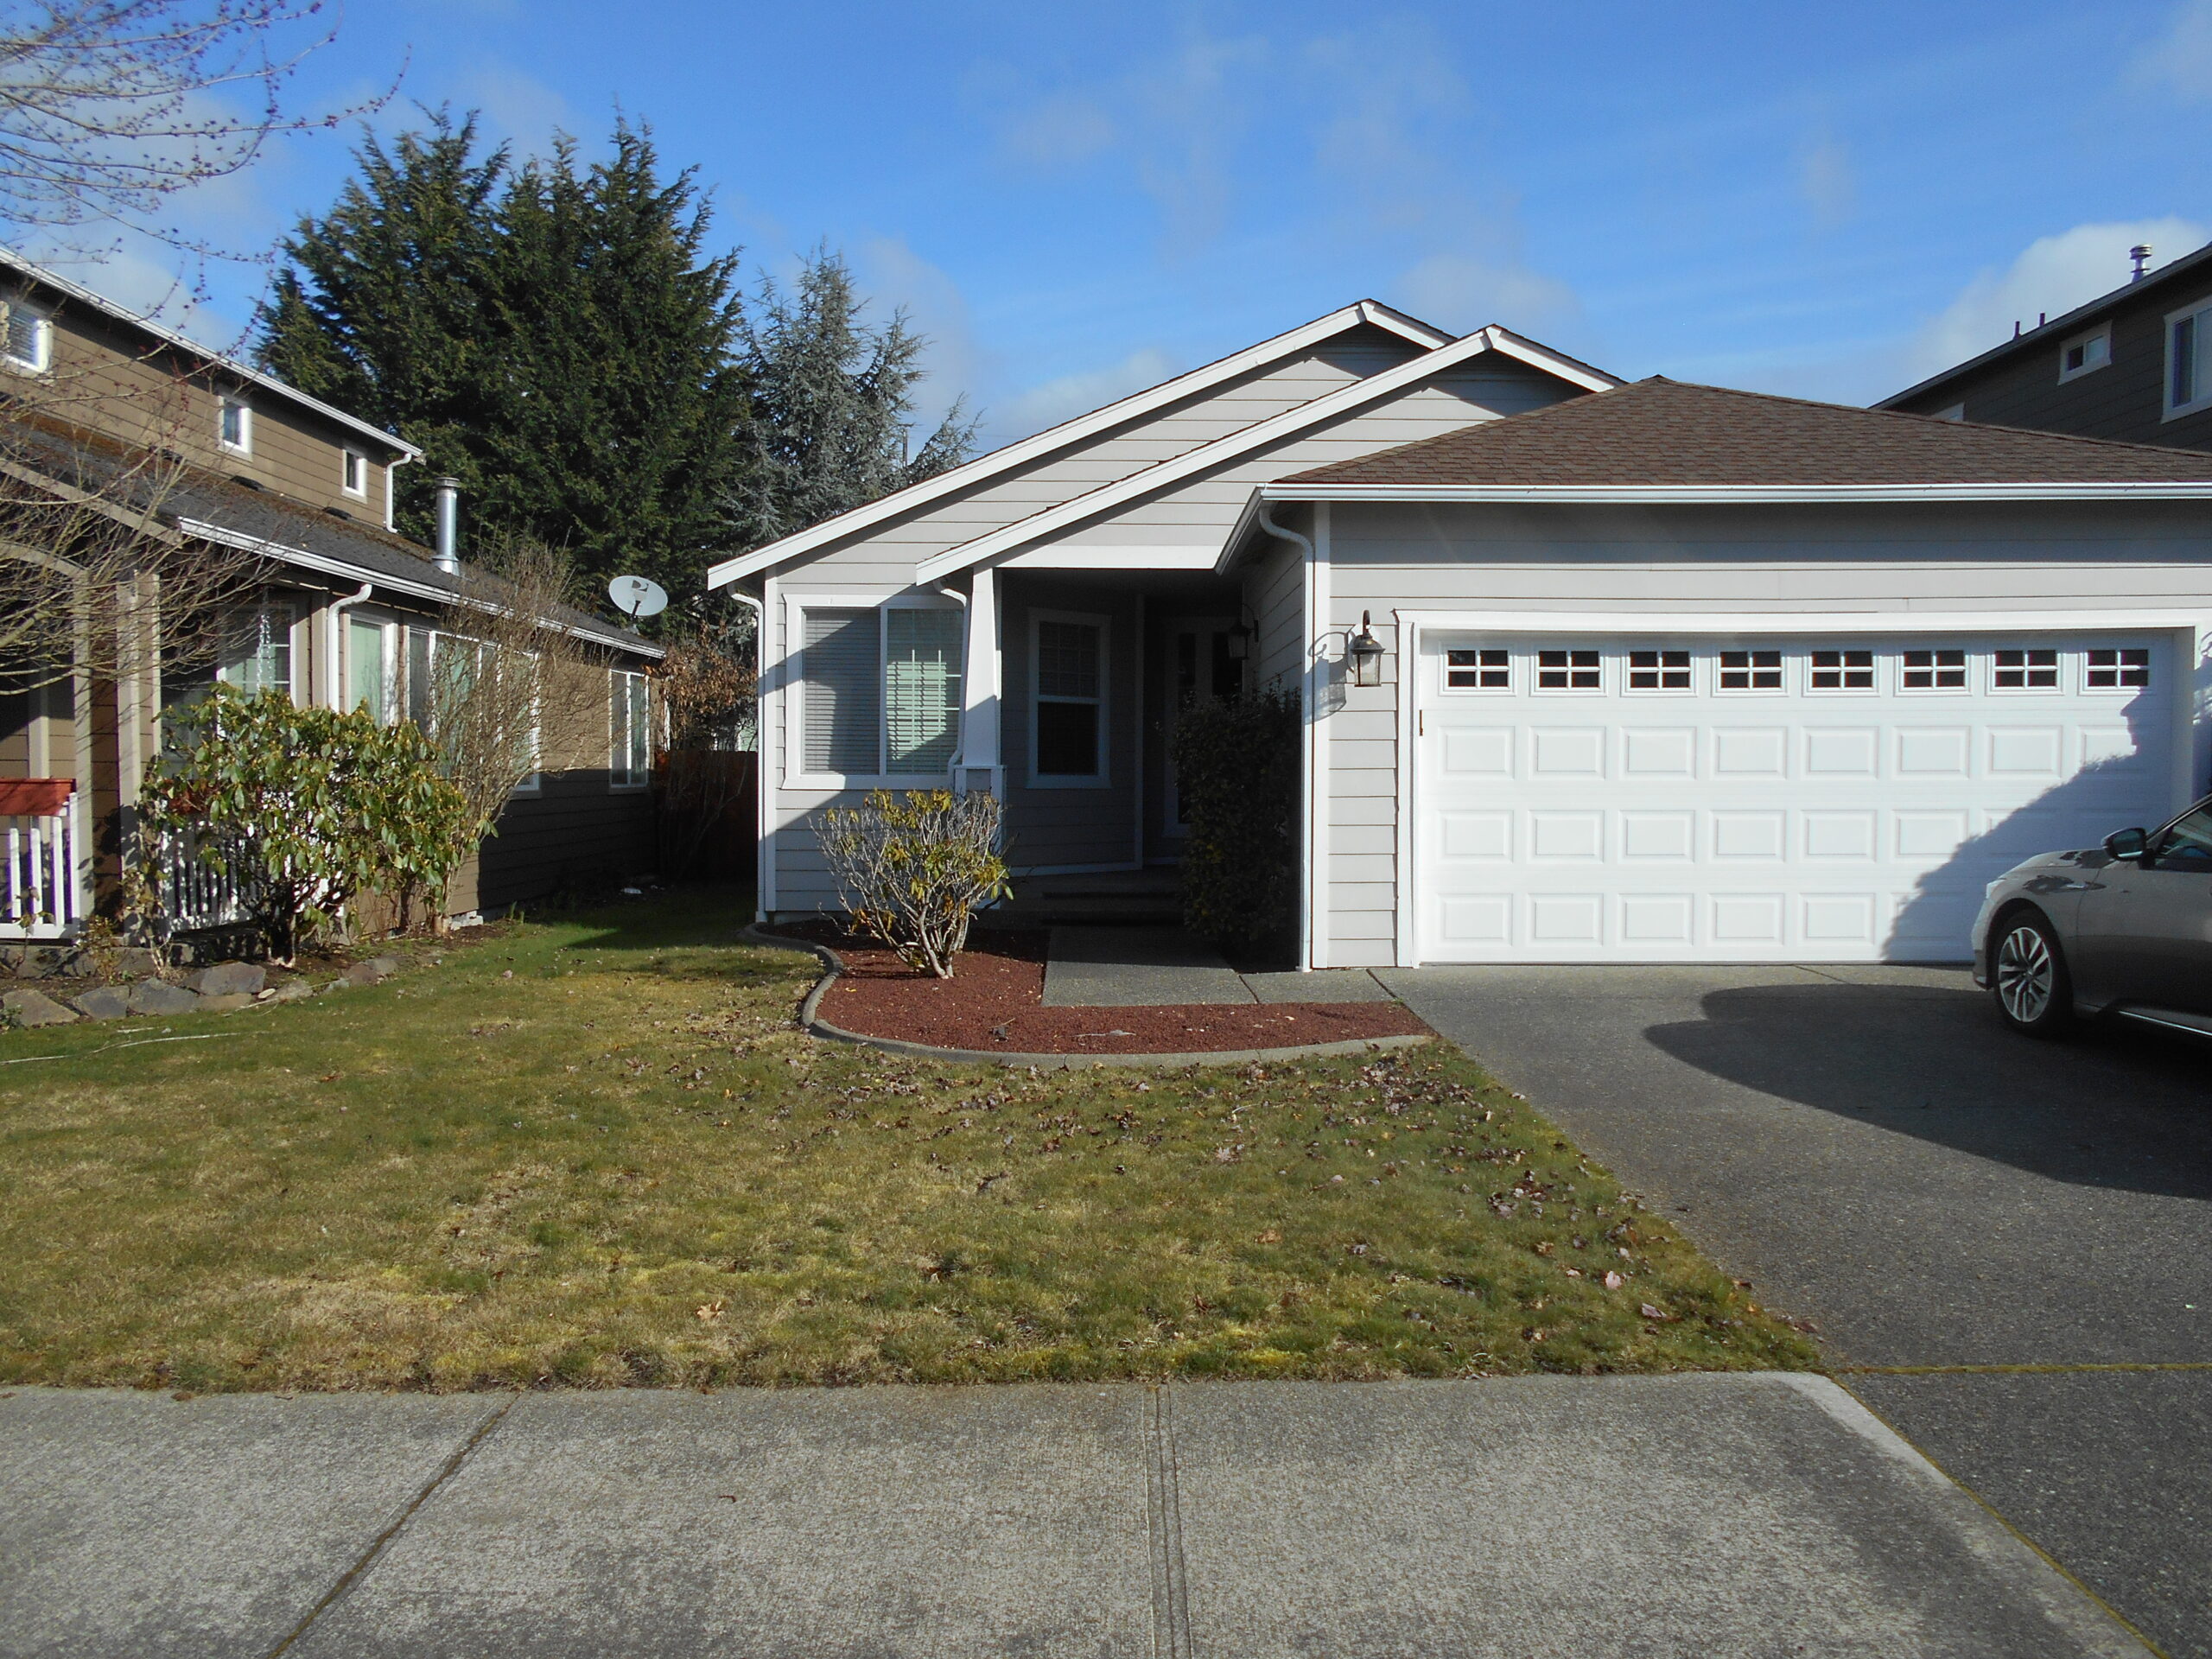 $2,550 – Puyallup 3 Bedroom Home in Gated Community